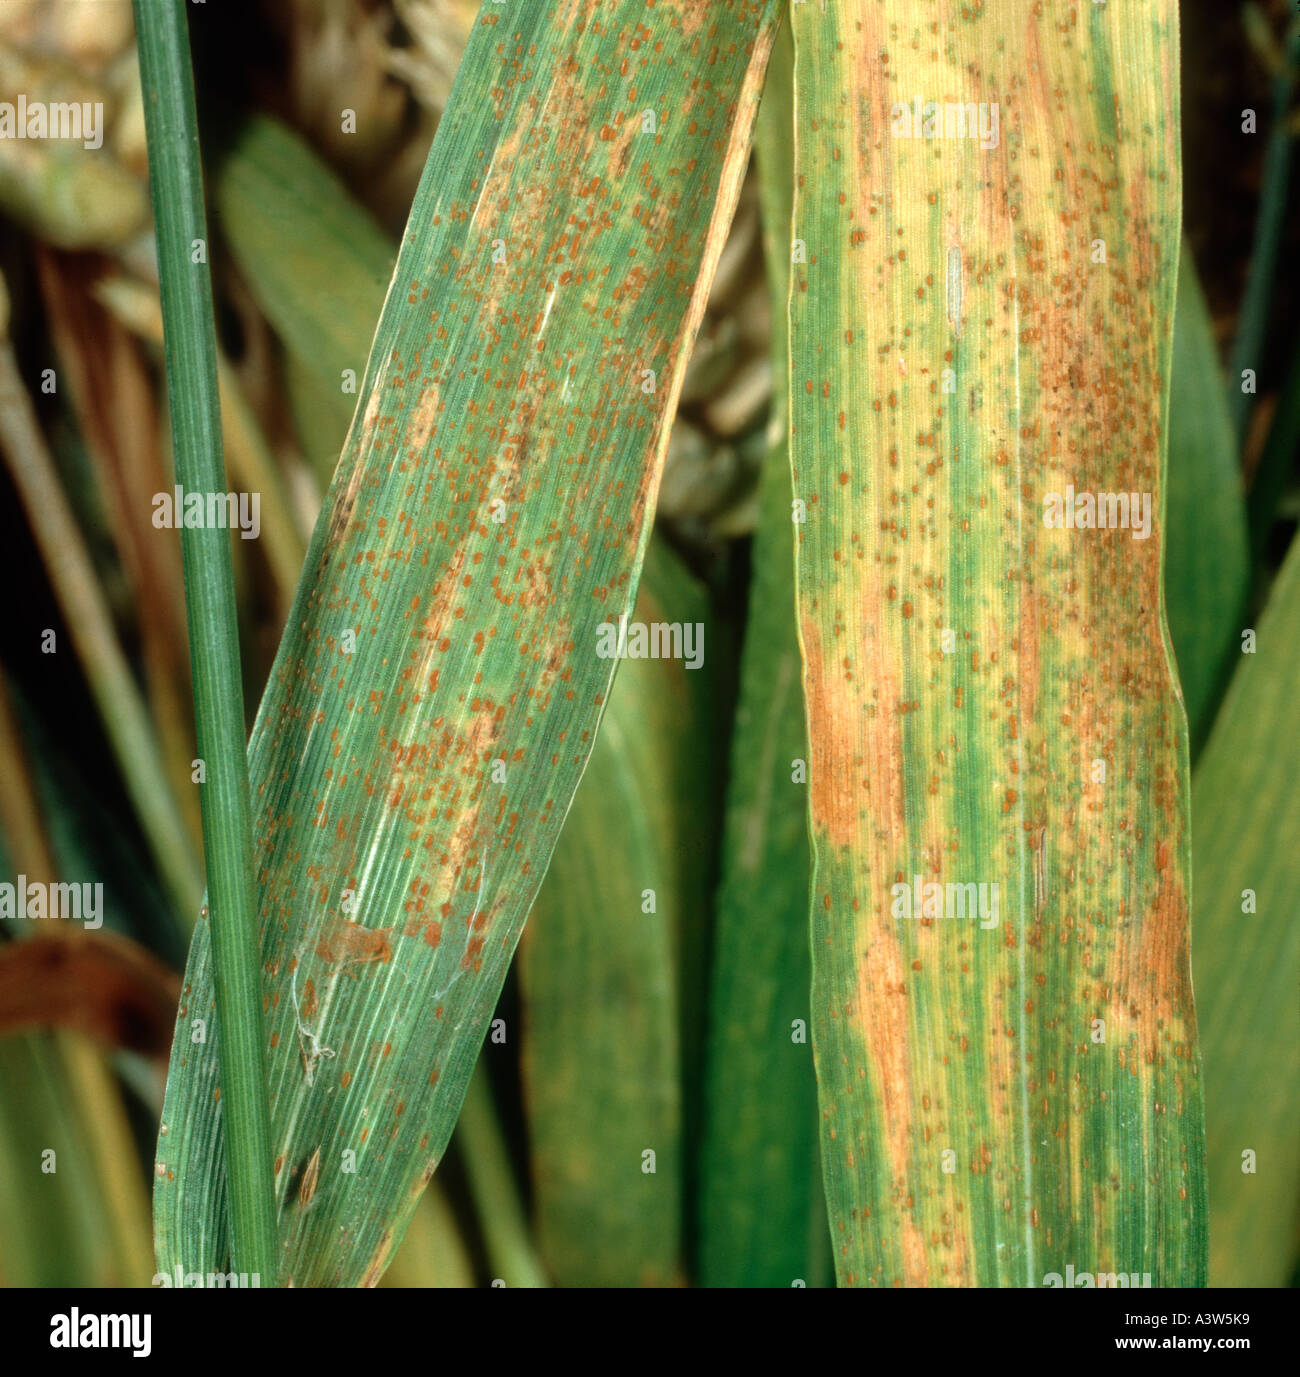 Wheat leaf or brown rust Puccinia triticina (recondita) infection on wheat leaves Stock Photo